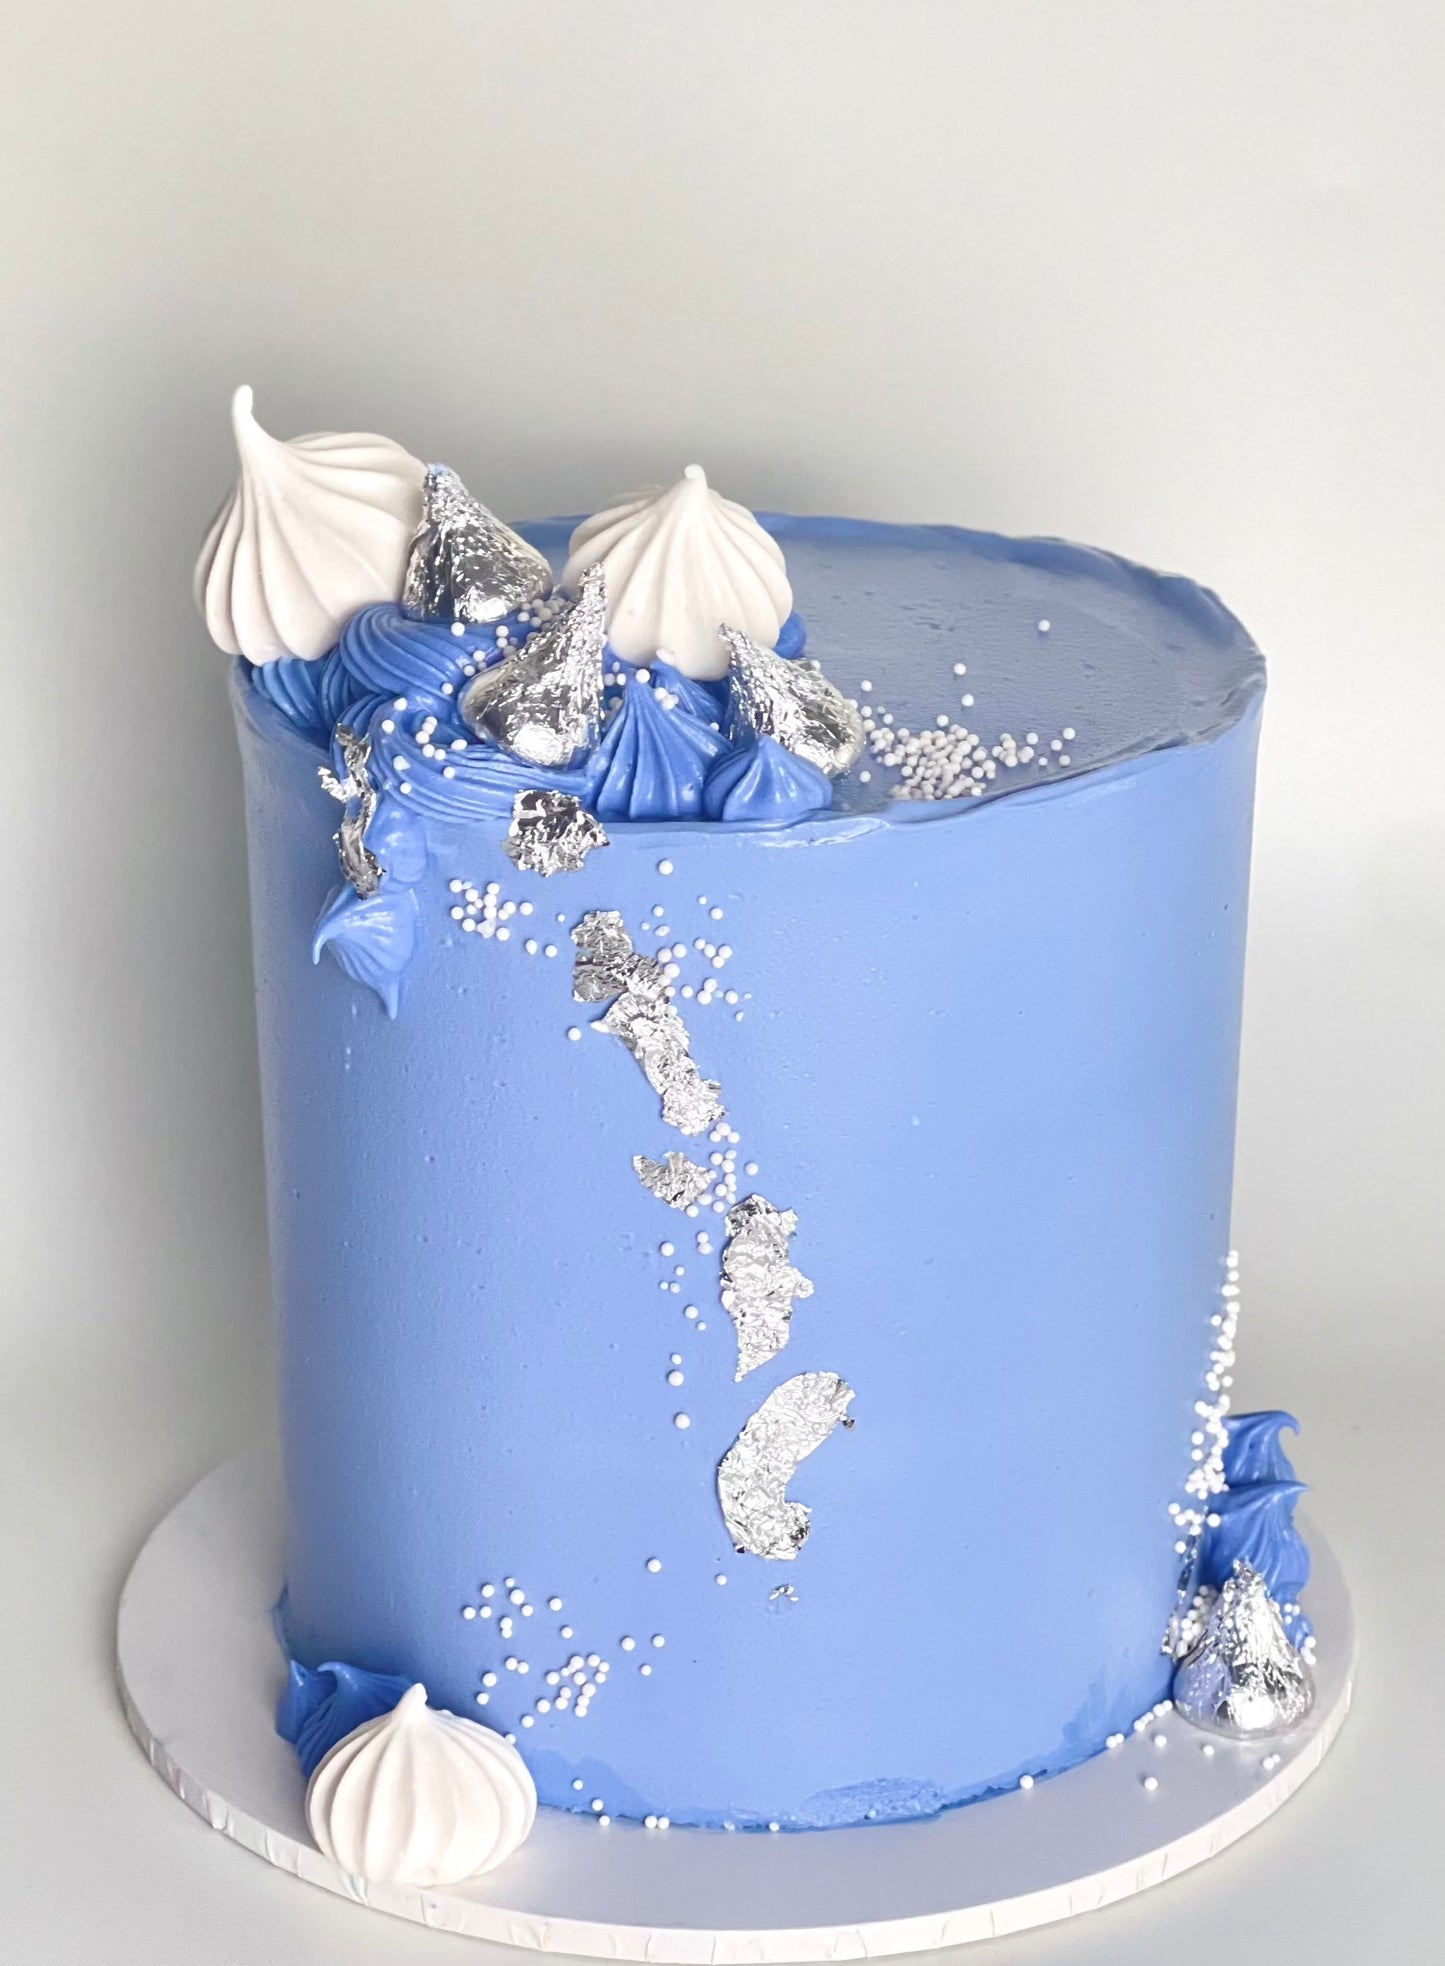 Elegant royal blue cake with silver adornments, complemented by Kisses chocolate and meringues, available for delivery in Brisbane